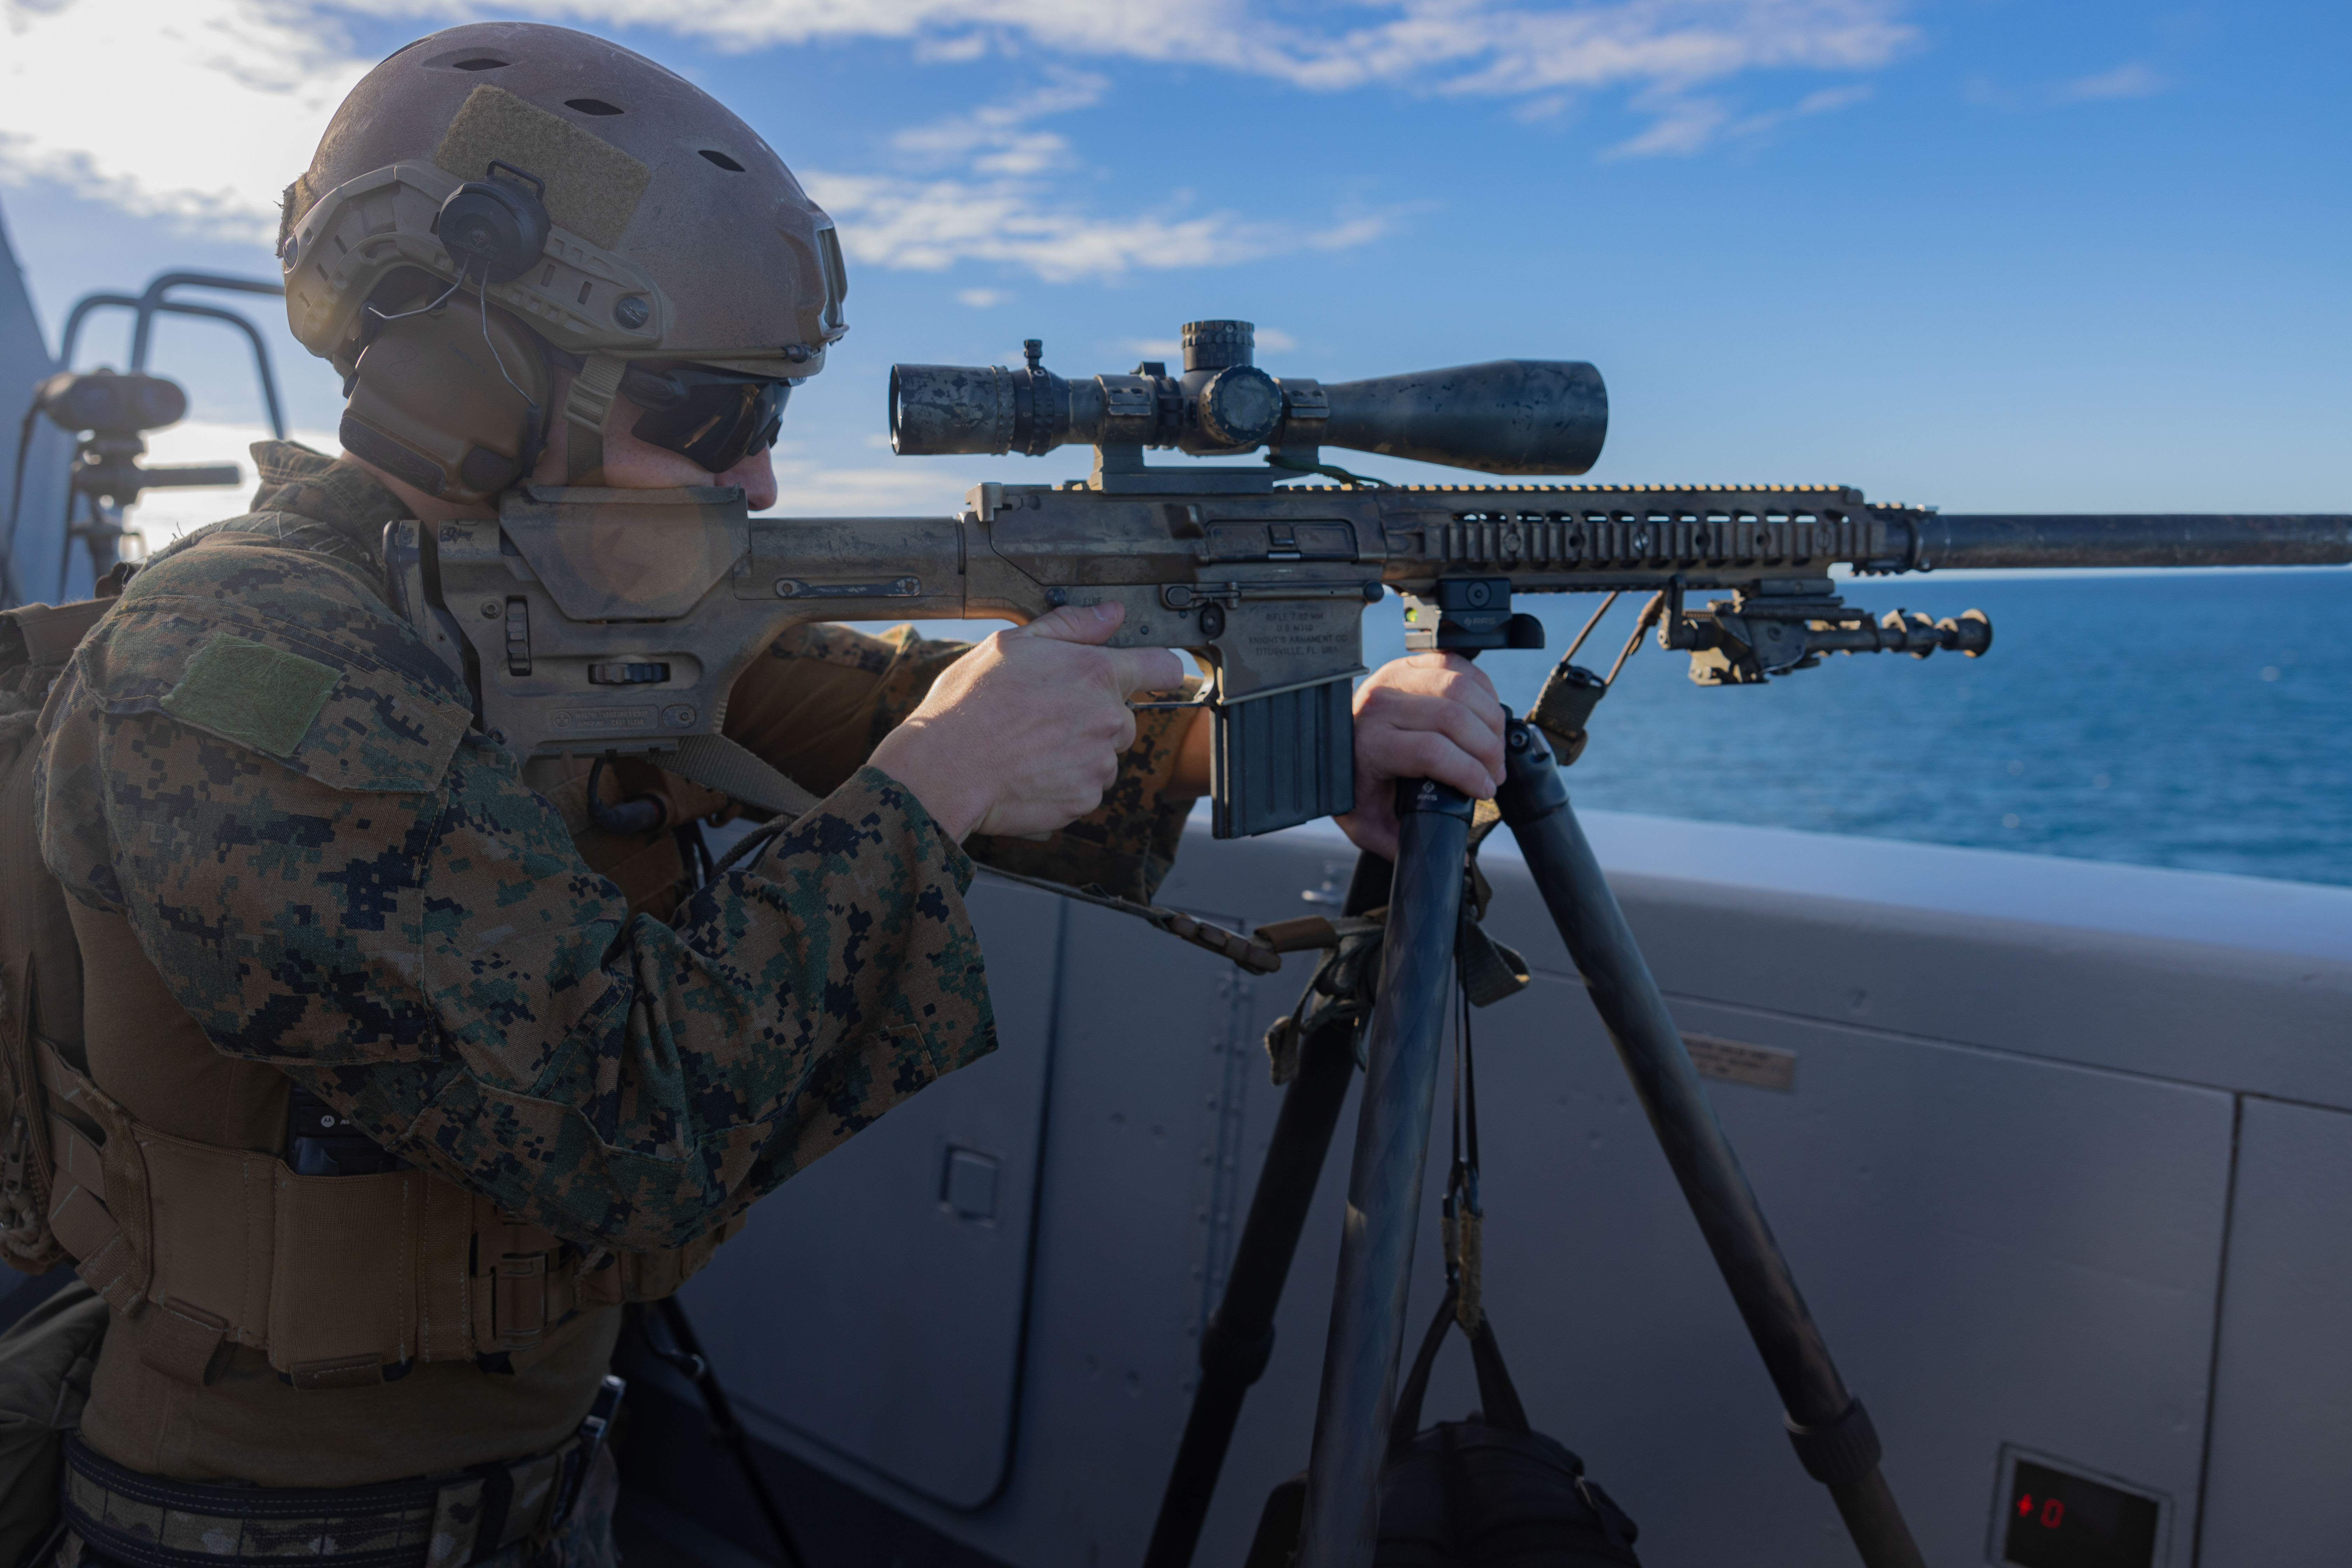 BLT 2/1 Snipers Provide Support During a VBSS